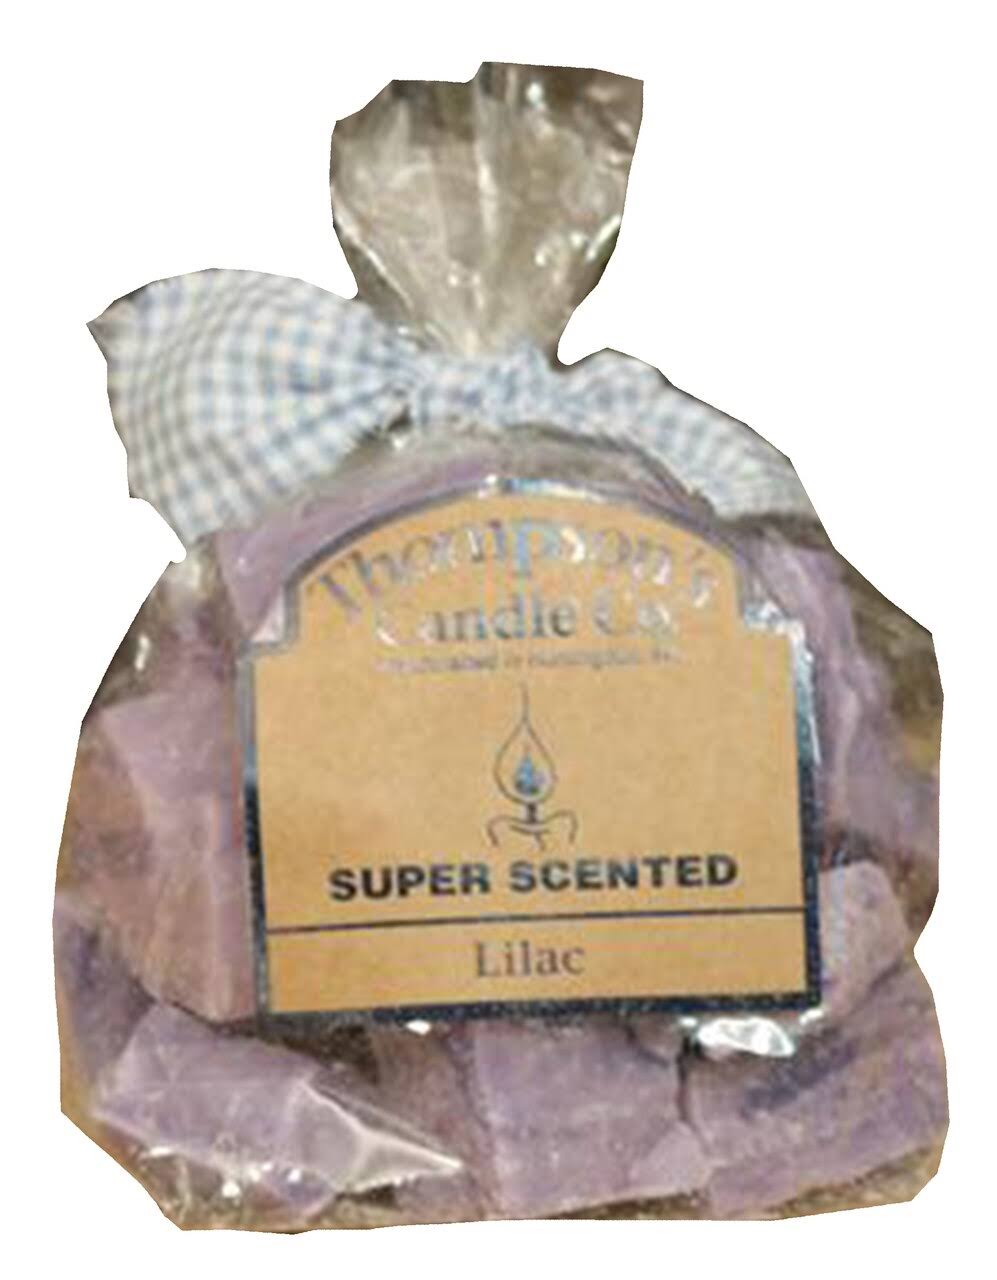 Thompson's Candle Co. Super Scented Lilac Crumbles